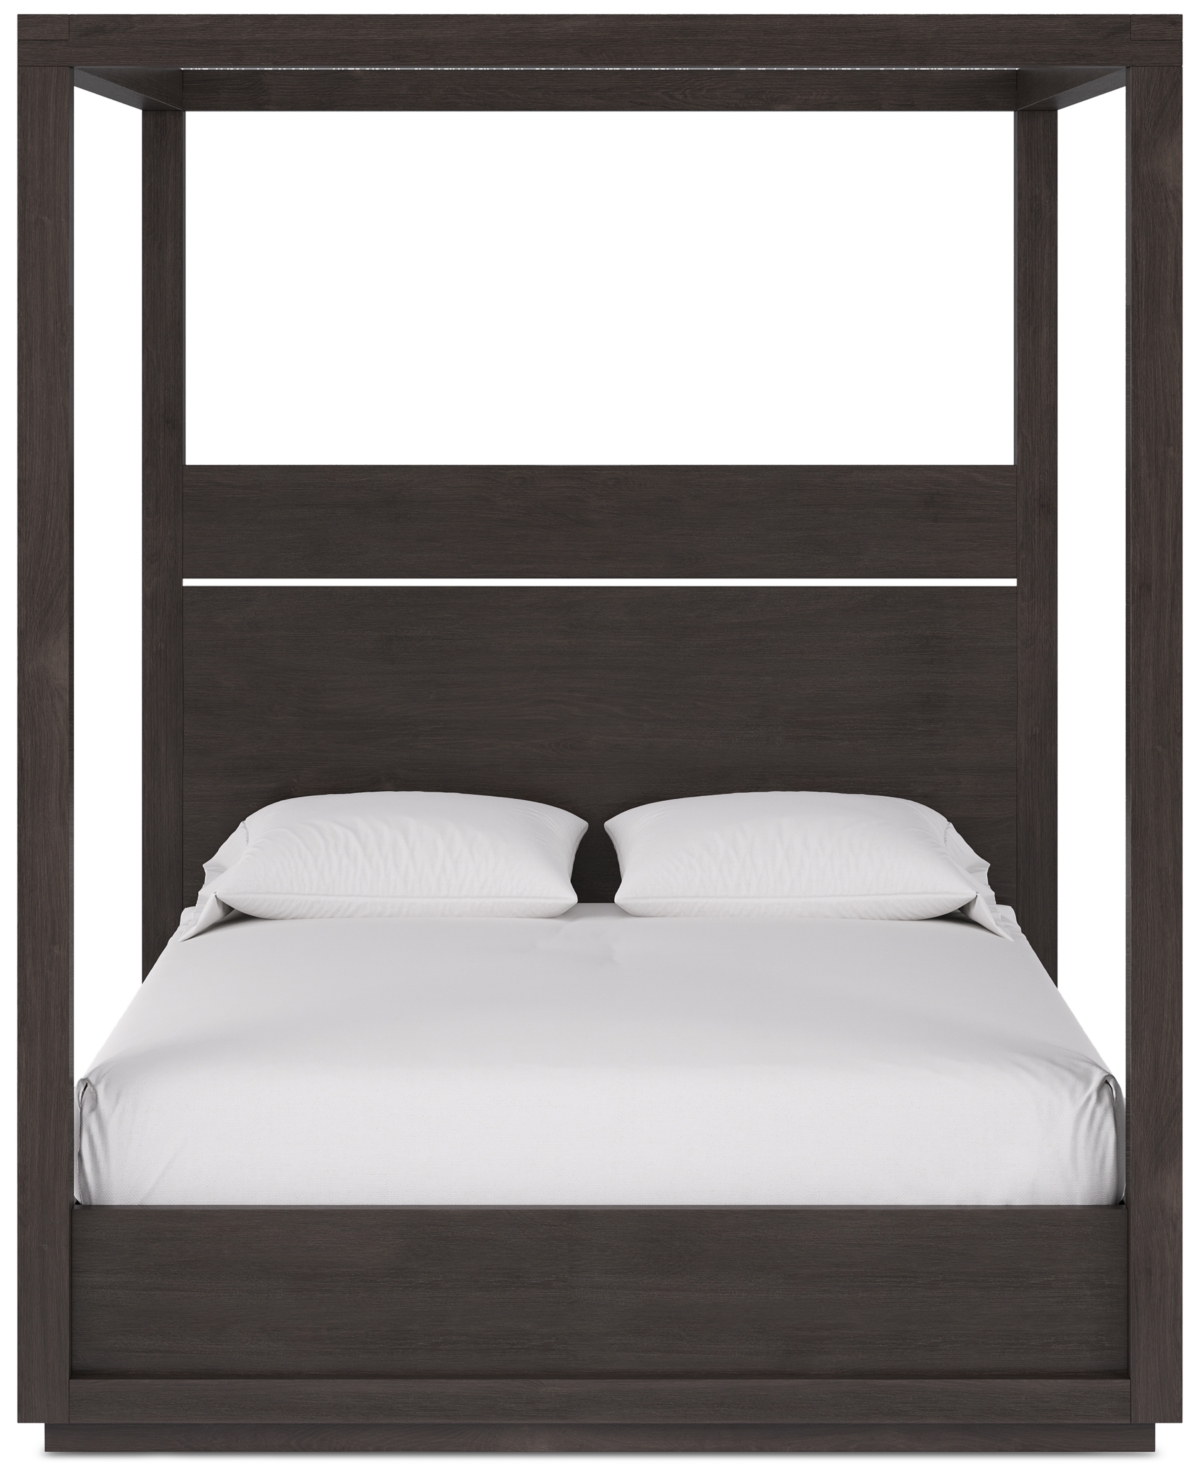 Shop Macy's Tivie 3pc Bedroom Set (california King Canopy Bed + Dresser + Nightstand), Created For  In Brown